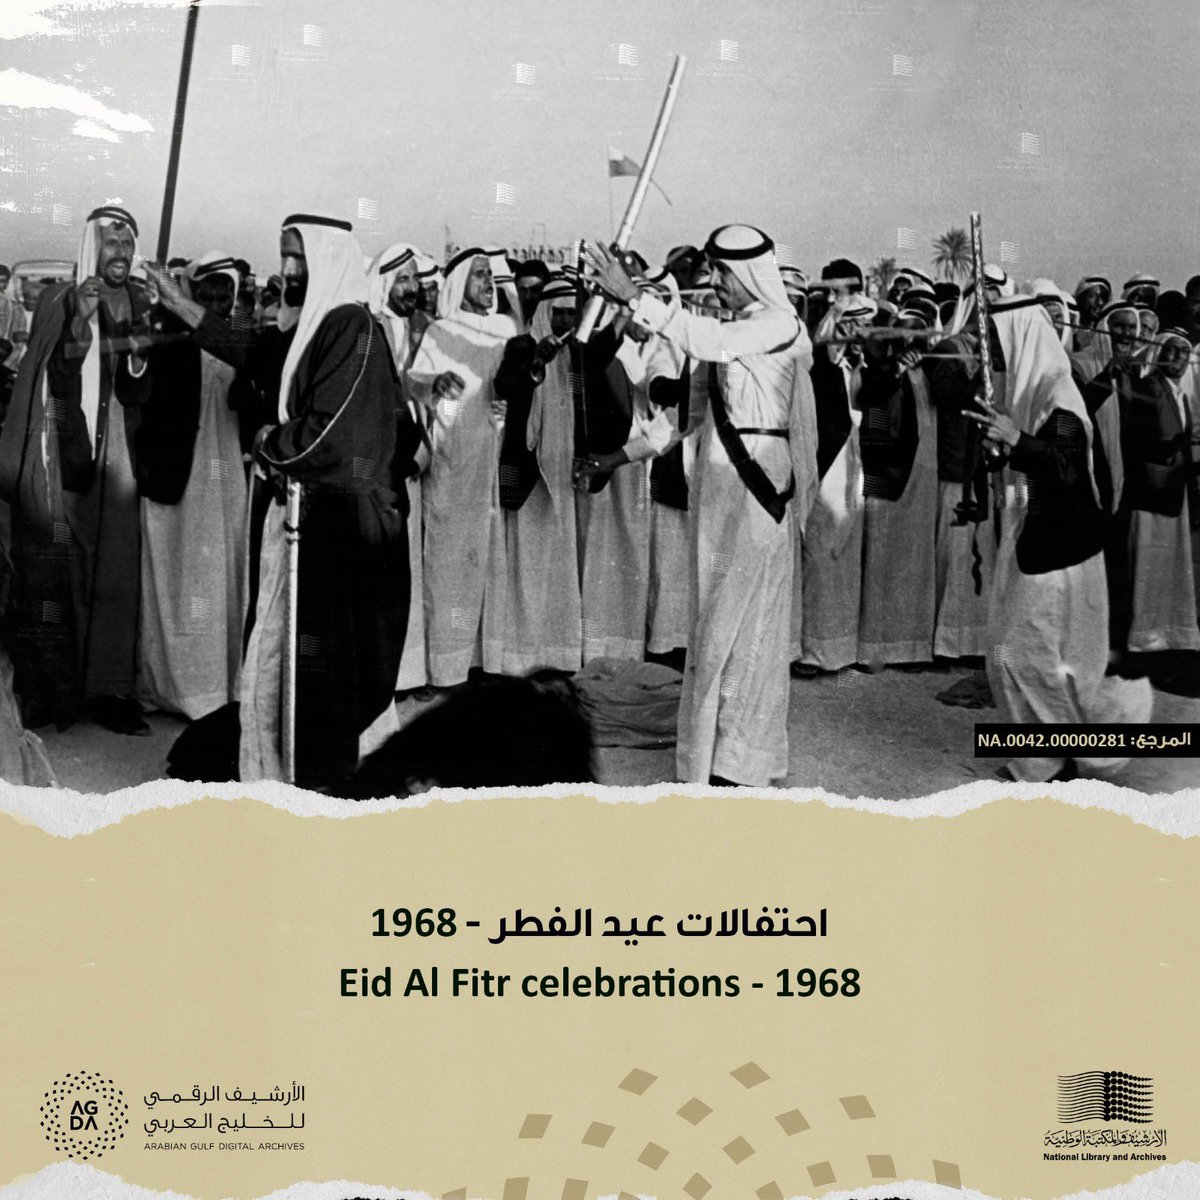 few days away from Eid Al Fitr, we share a picture that dates  back to  December 1968, of the people of the UAE celebrating Eid Al Fitr.

#nlauae #NationalLibraryandArchives #AGDA #NationalLibrary  
#TheNationsMemory #Archives #NationalArchives  #UAE #UAEHistory #UAEArchives